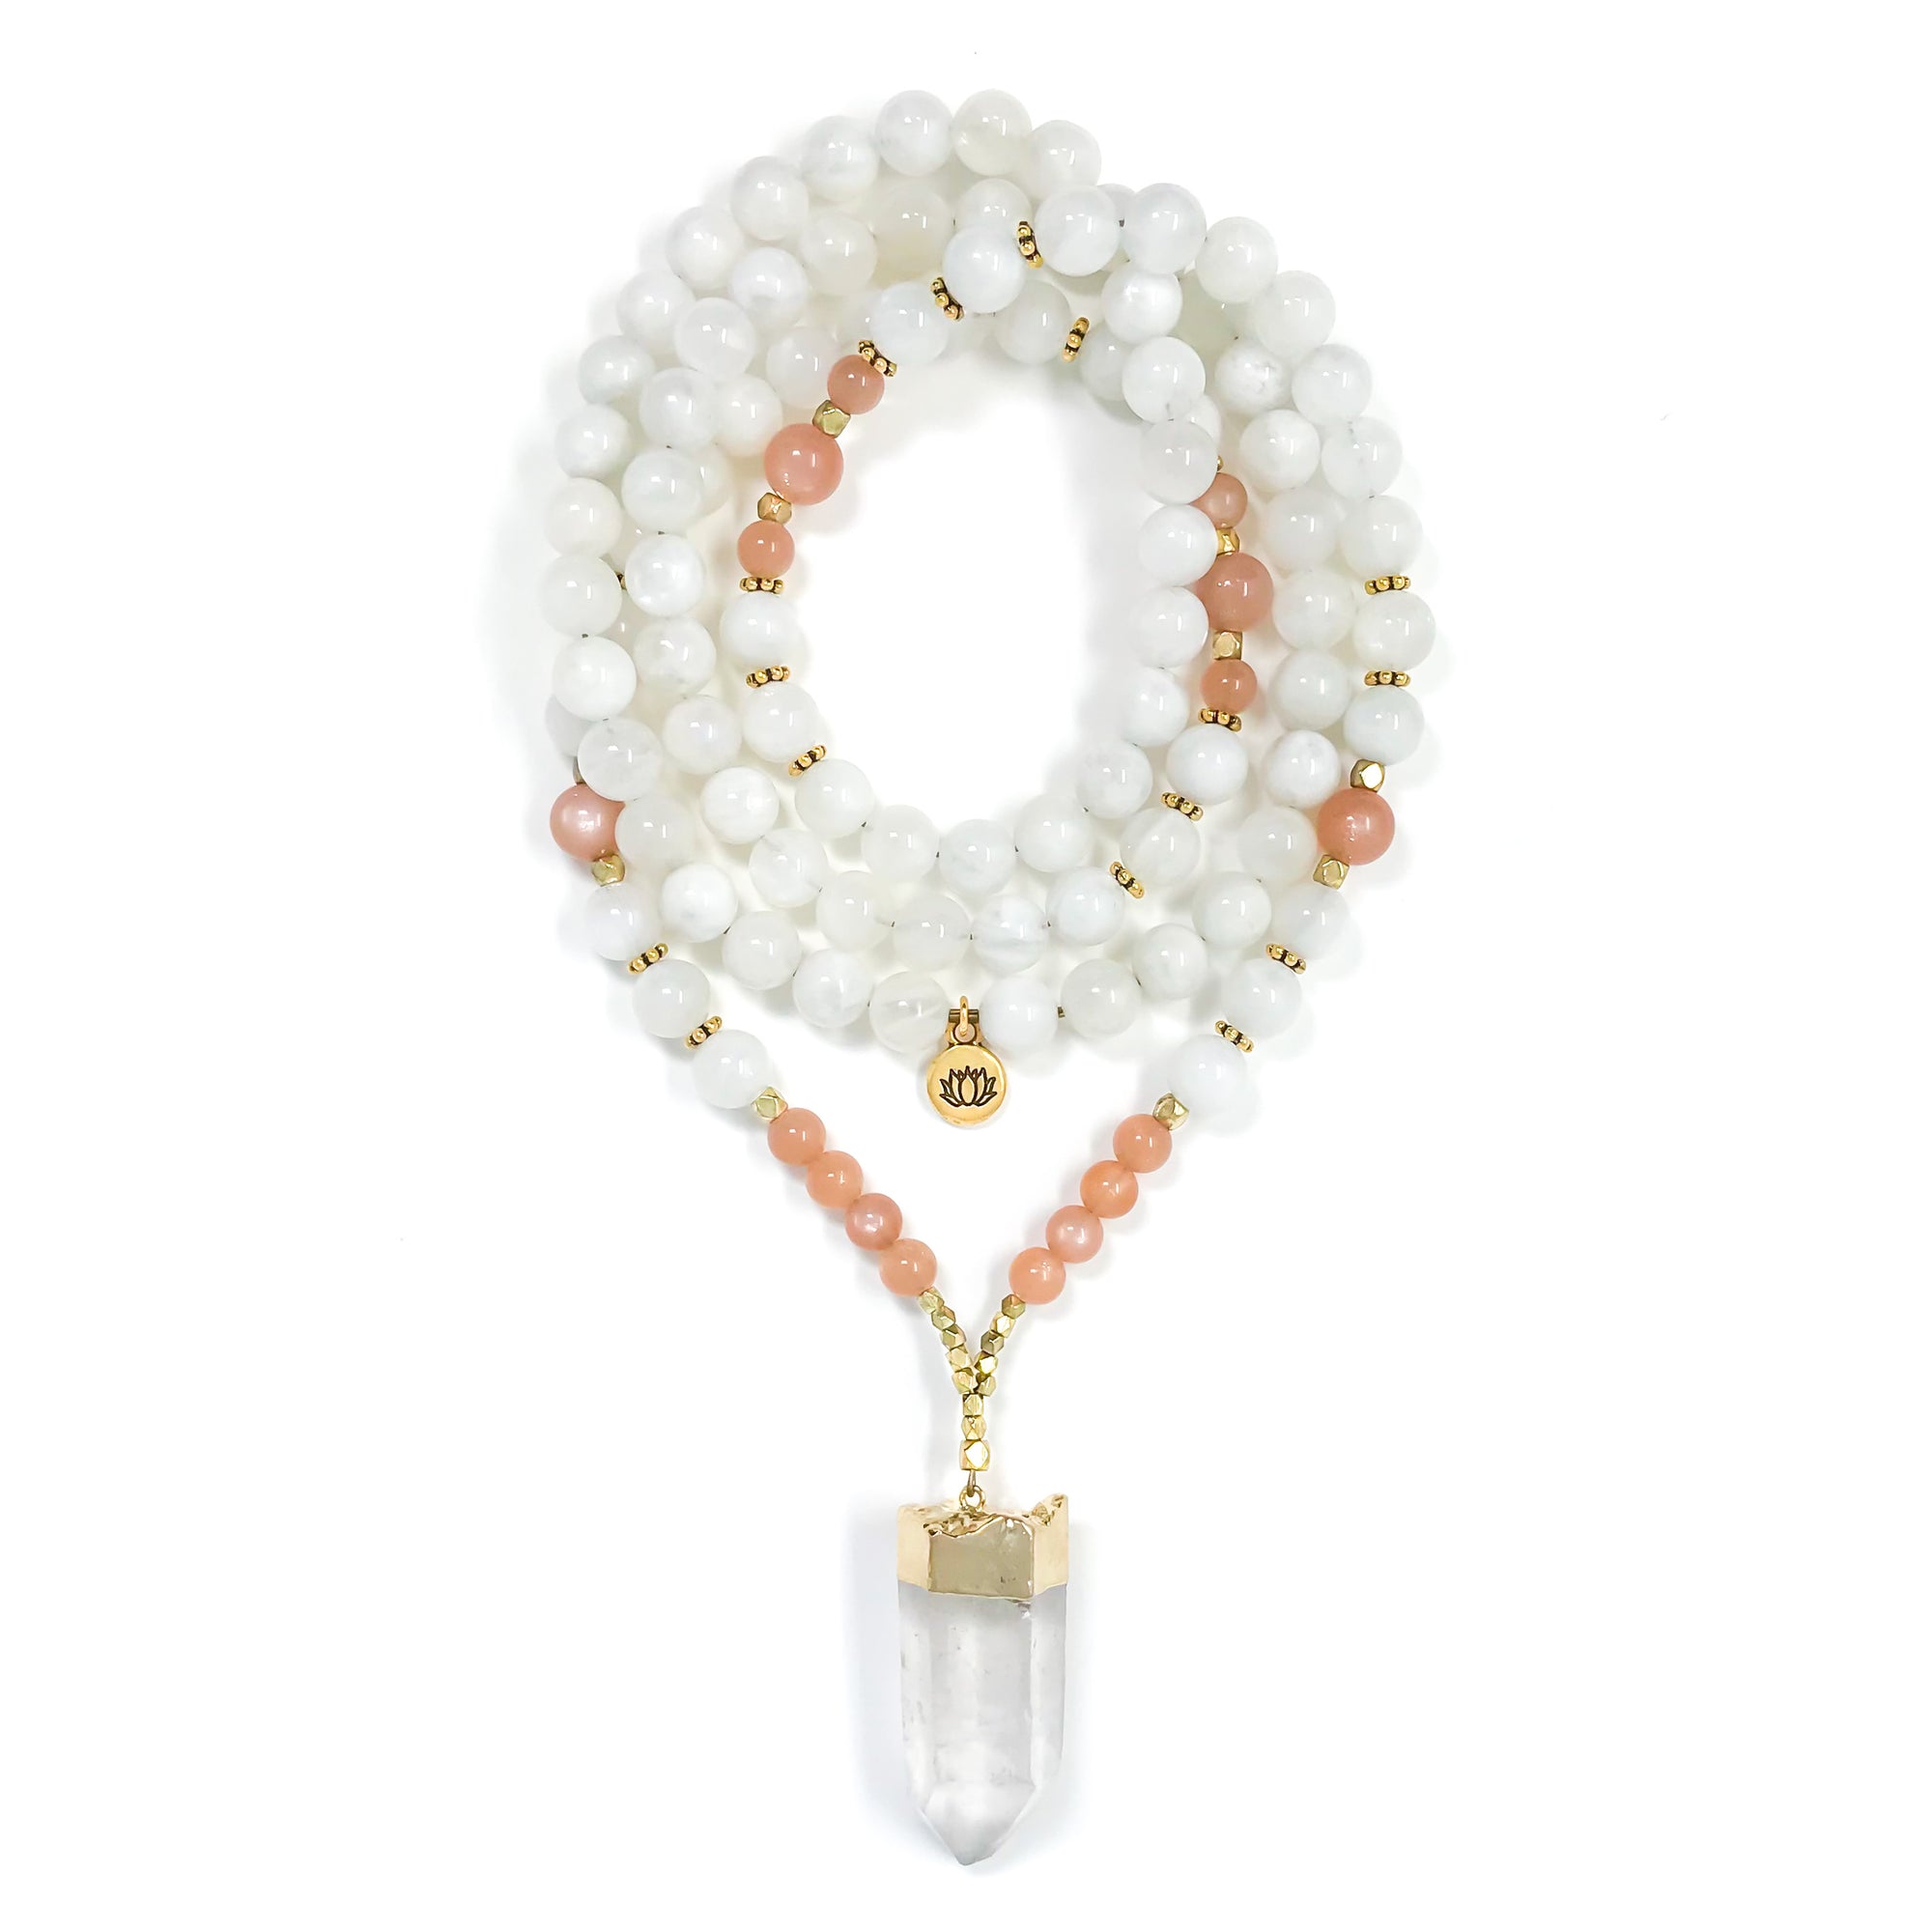 I Am Divine Feminine: Moonstone Sunstone Mala necklace made with white Rainbow moonstone and orange Sunstone beads with Quartz Crystal point as a focal.